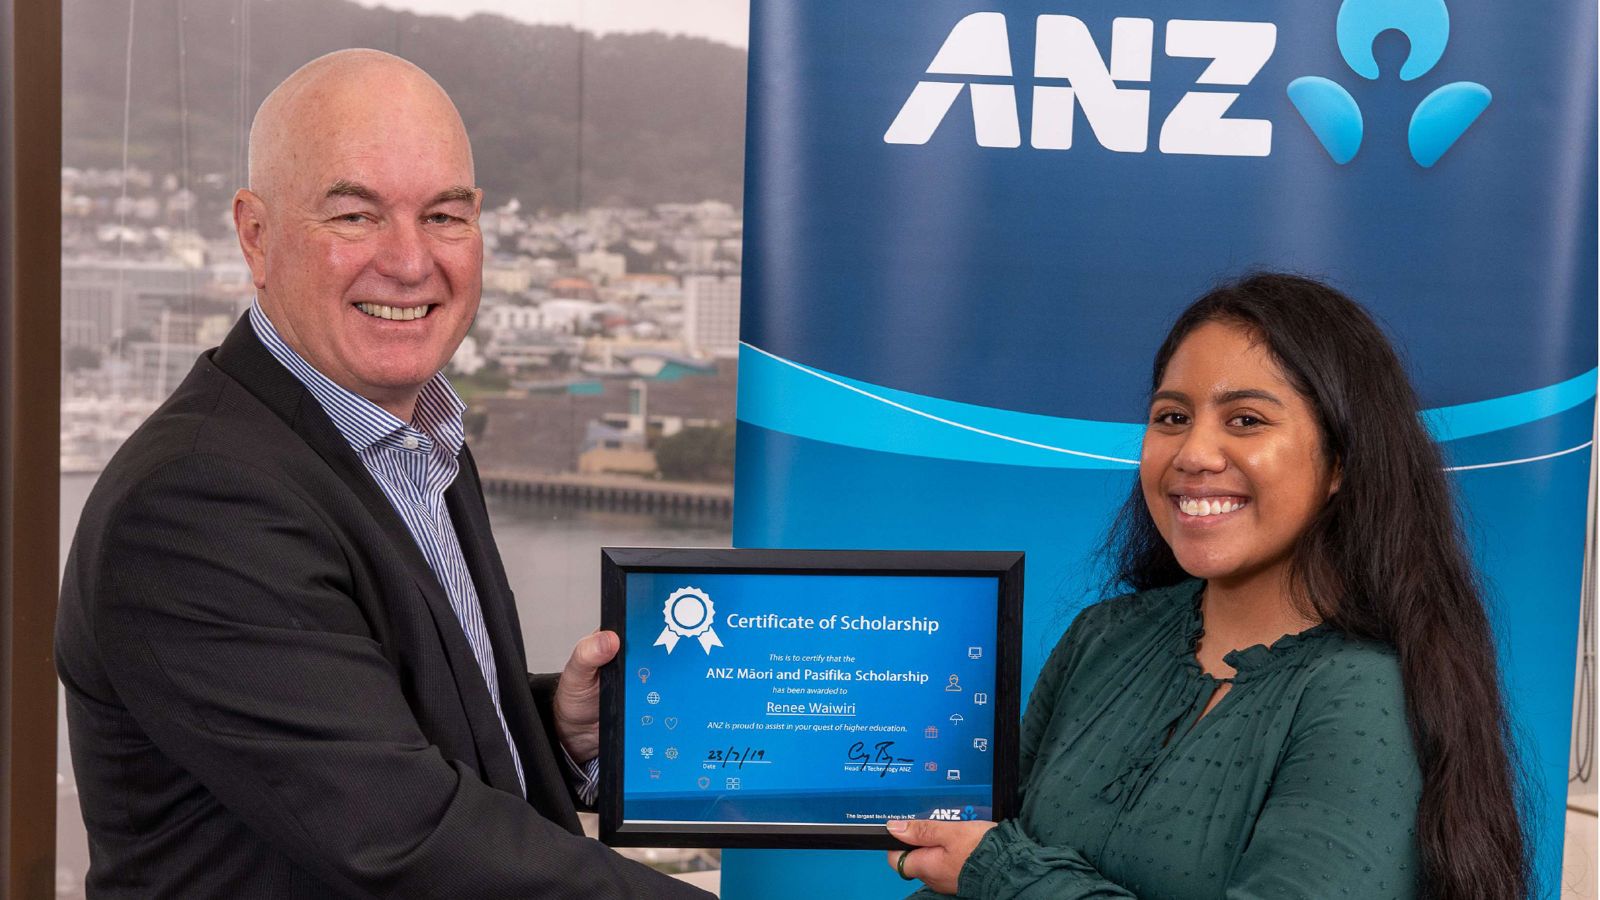 Renee accepts her scholarship certificate. Wellington harbour can be seen in the background.